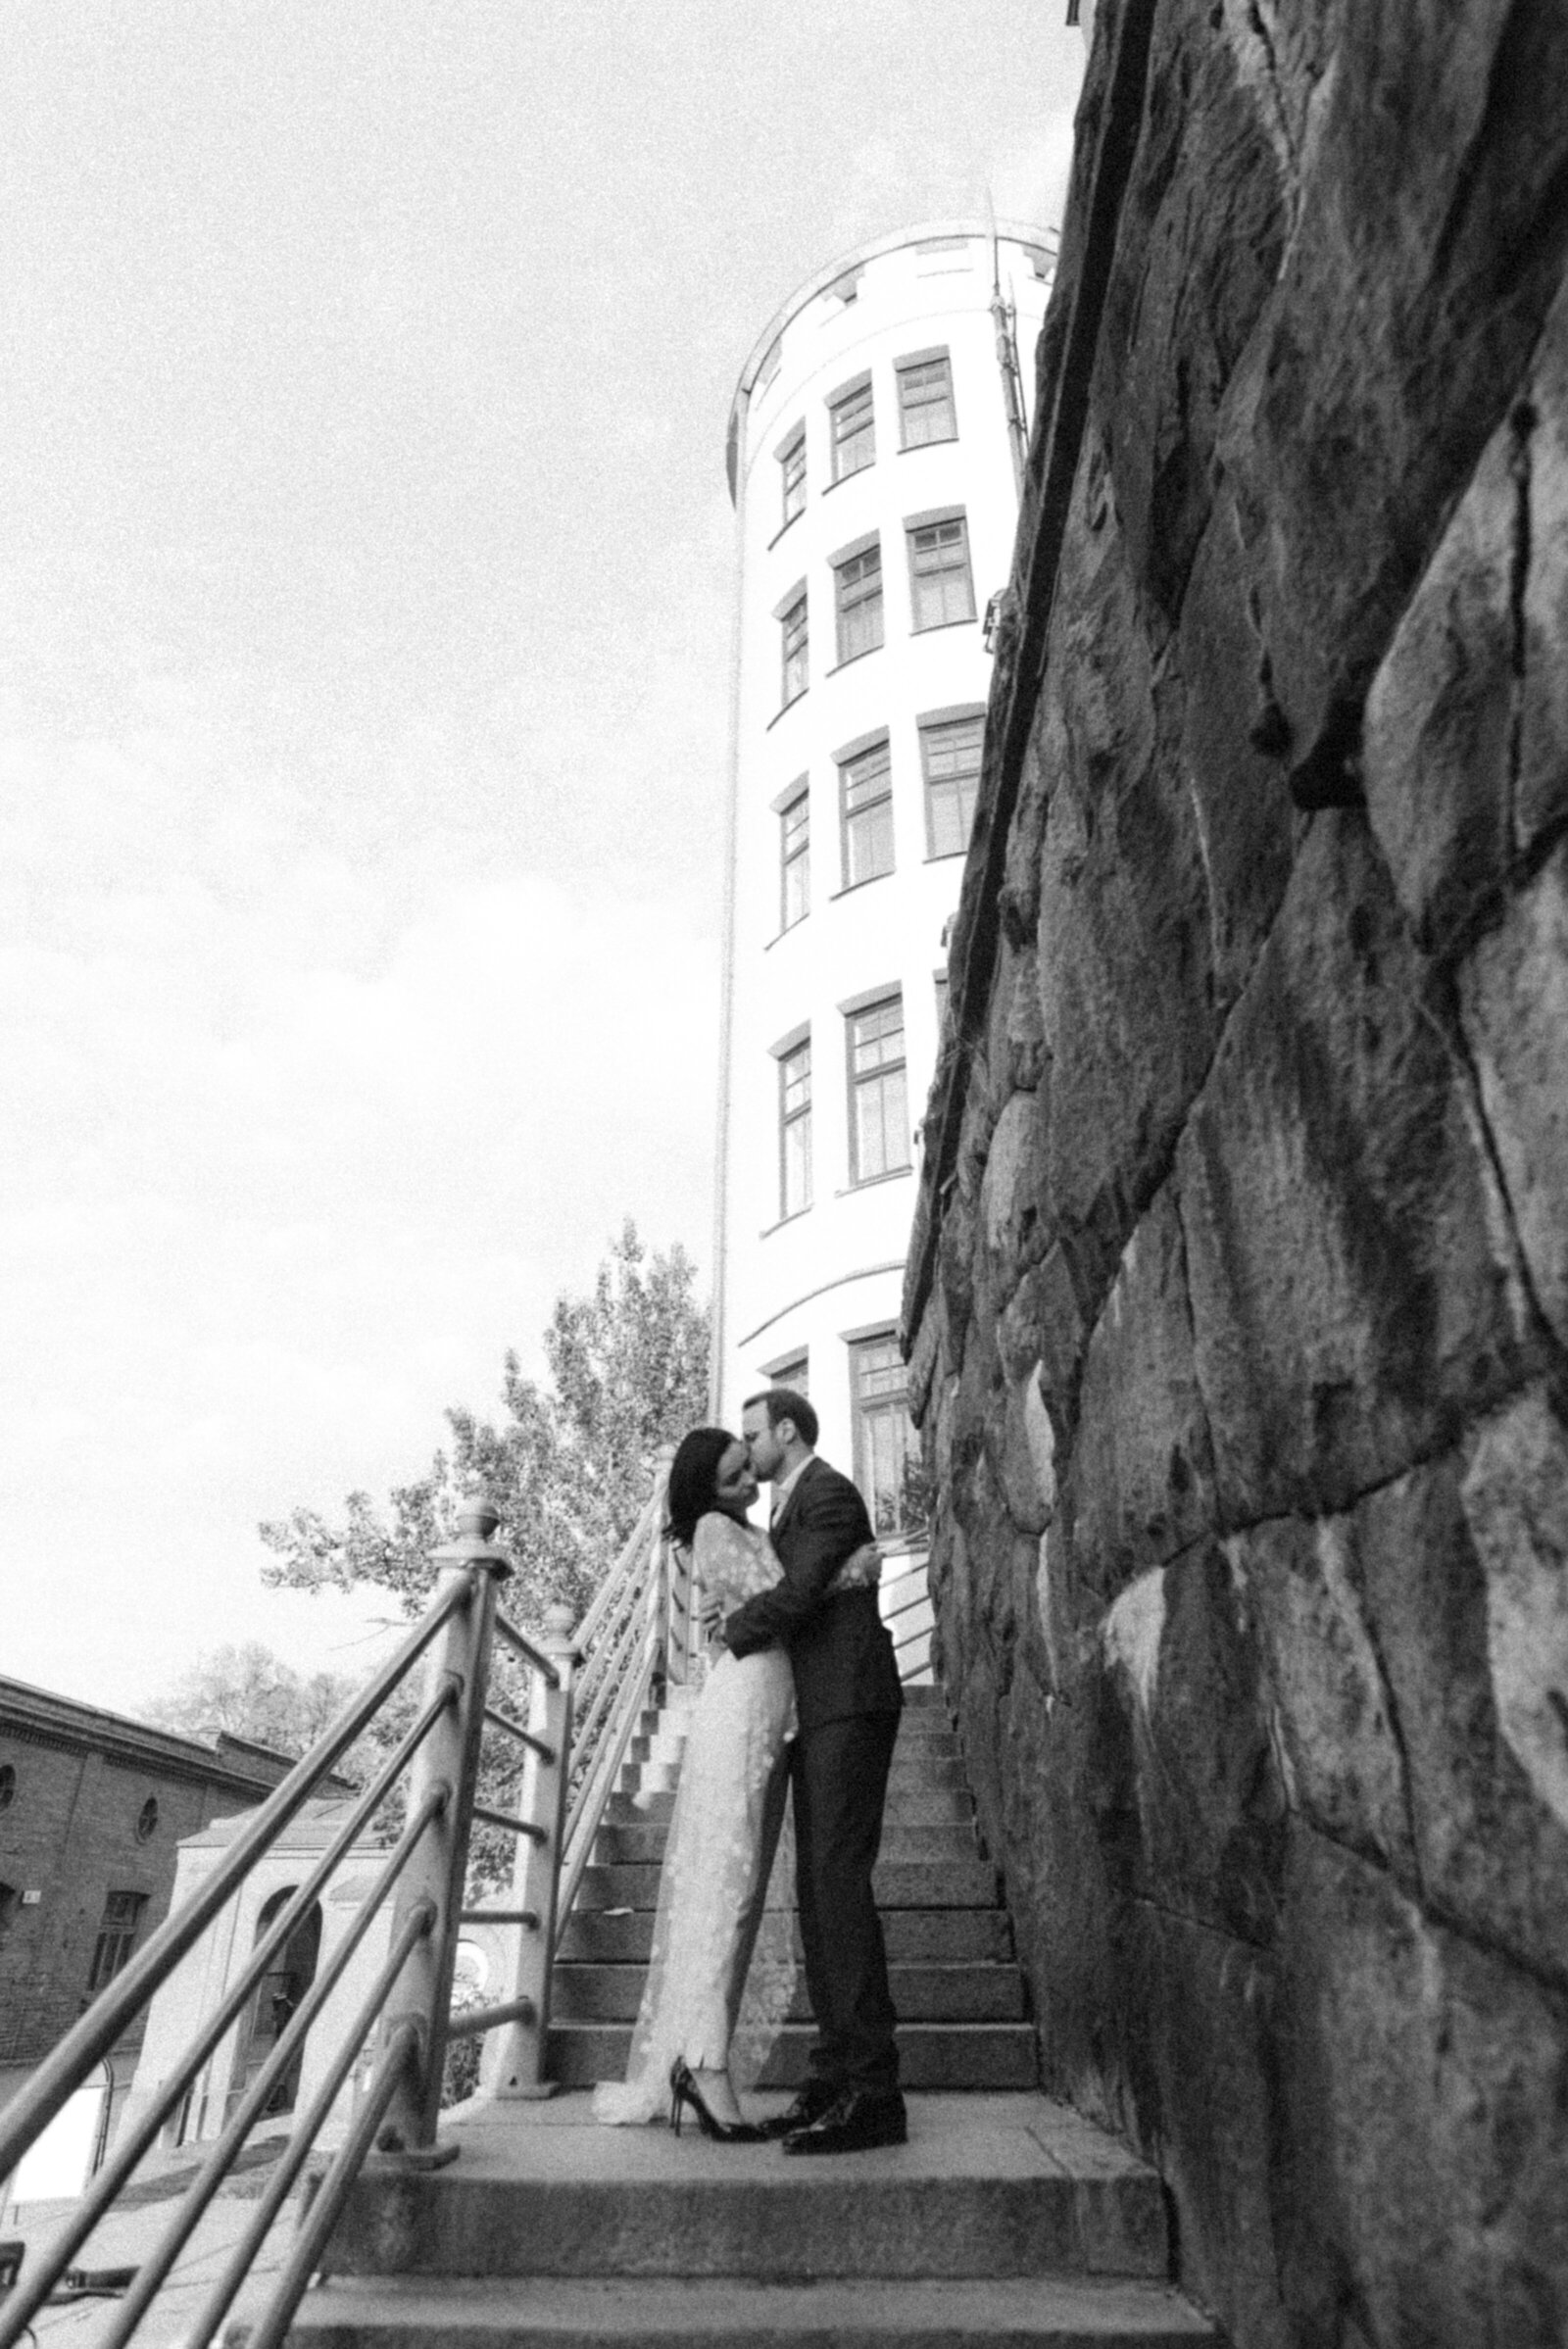 Urban wedding photography by a Scandinavian wedding photographer Hannika Gabrielsson. A wedding couple is hugging on the stairs in front of a building.